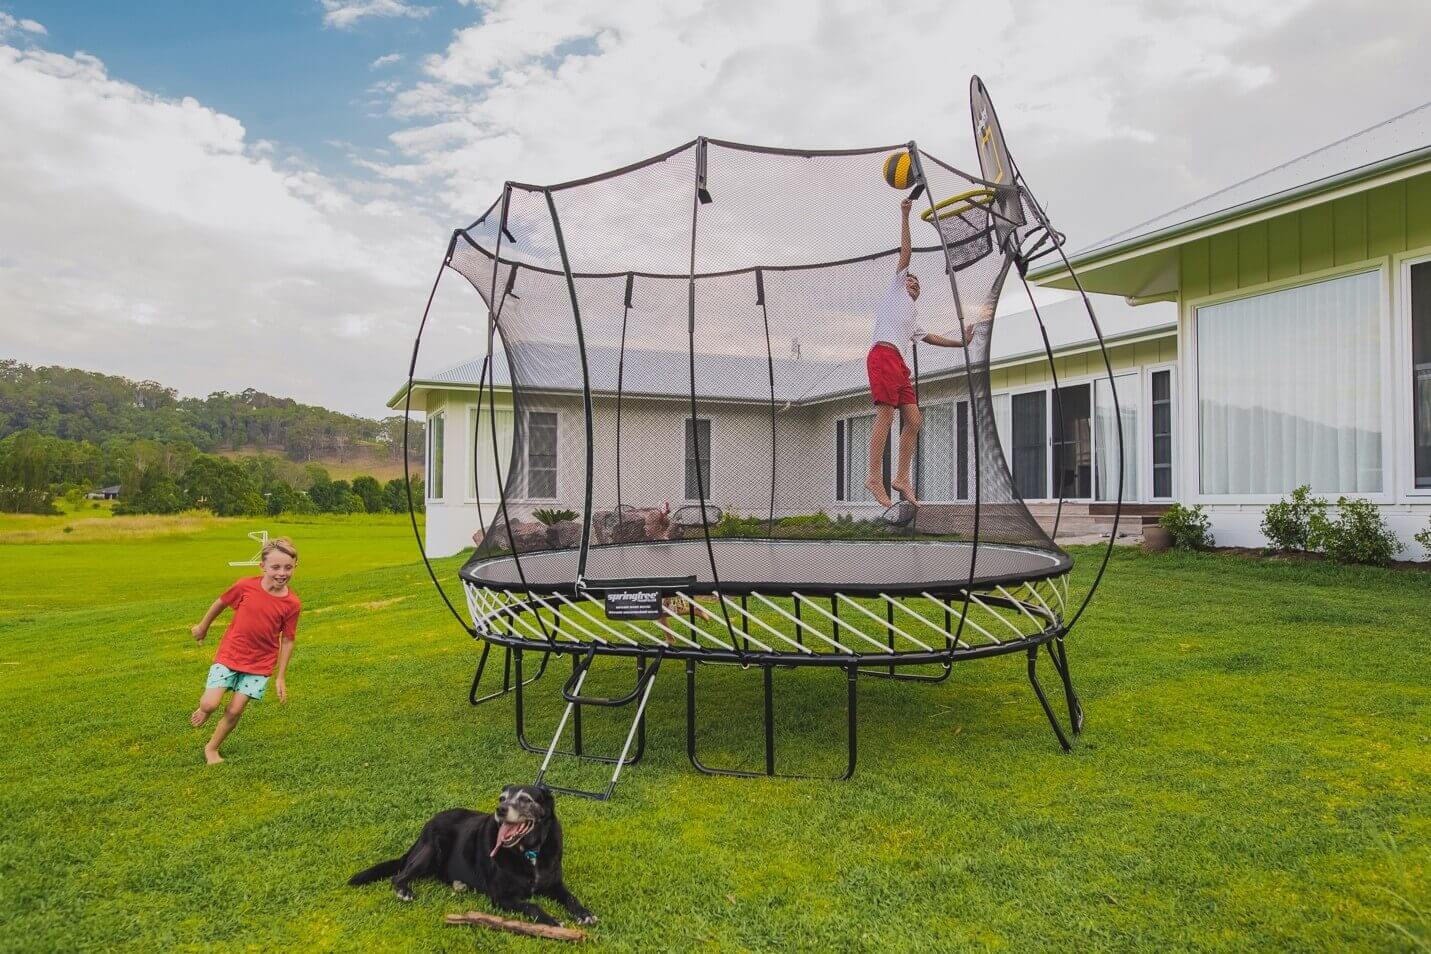 A kid dunking on a FlexrHoop while another kid and a dog stay outside of the trampoline